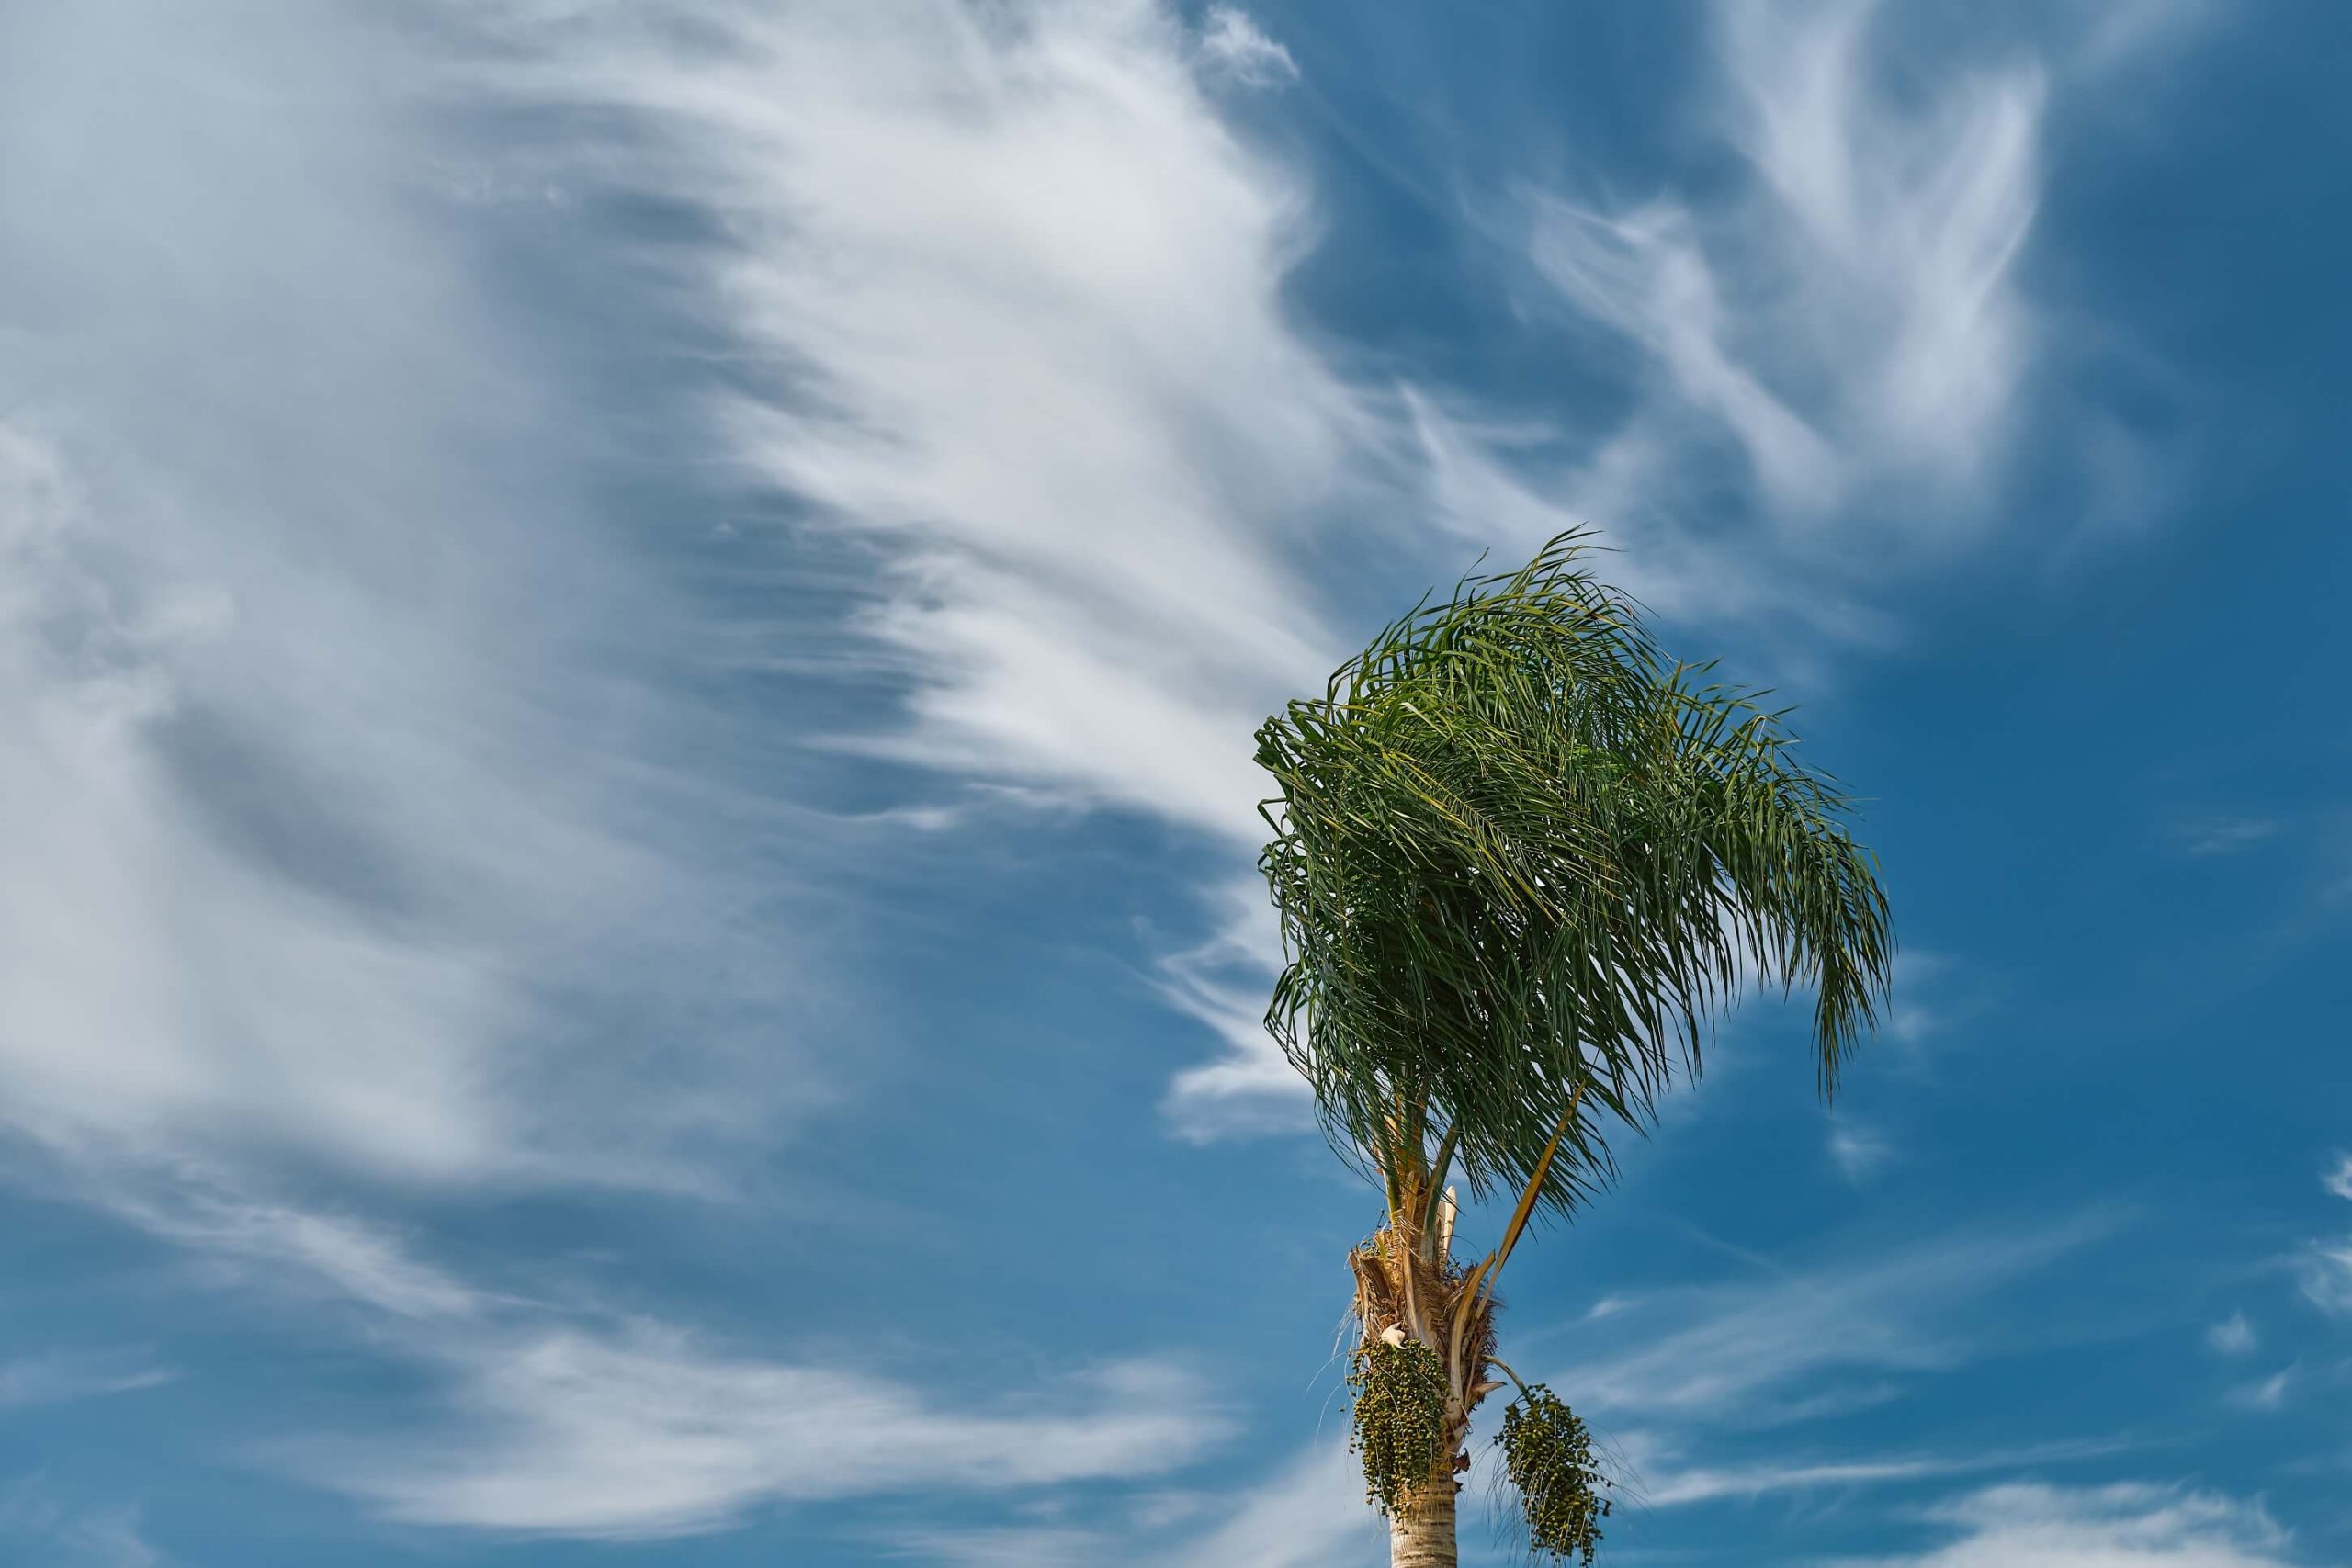 A photo of a palm tree in the storm wind